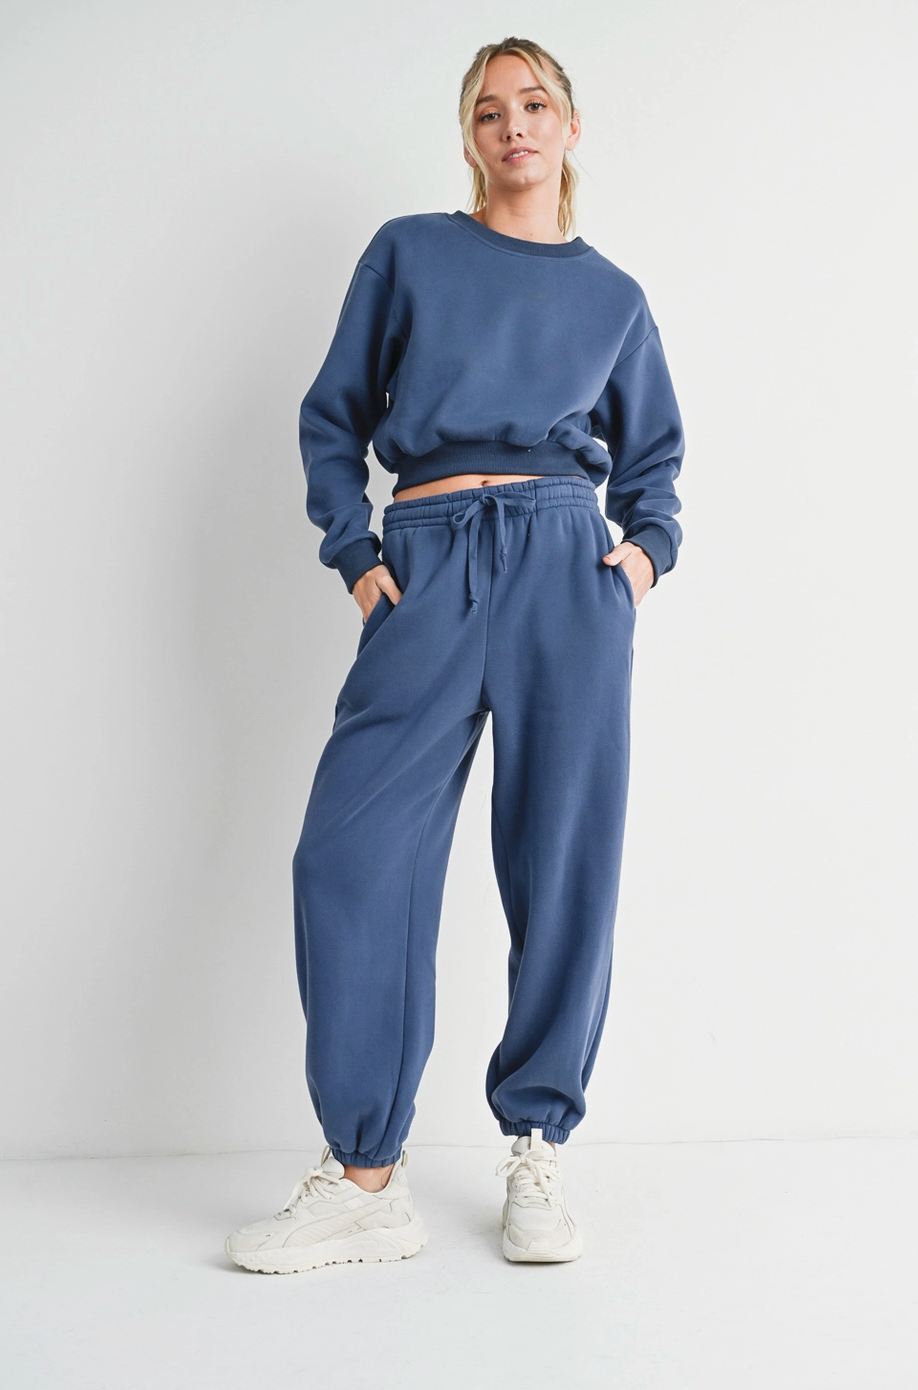 Layover Cropped Jogger Set - Blue